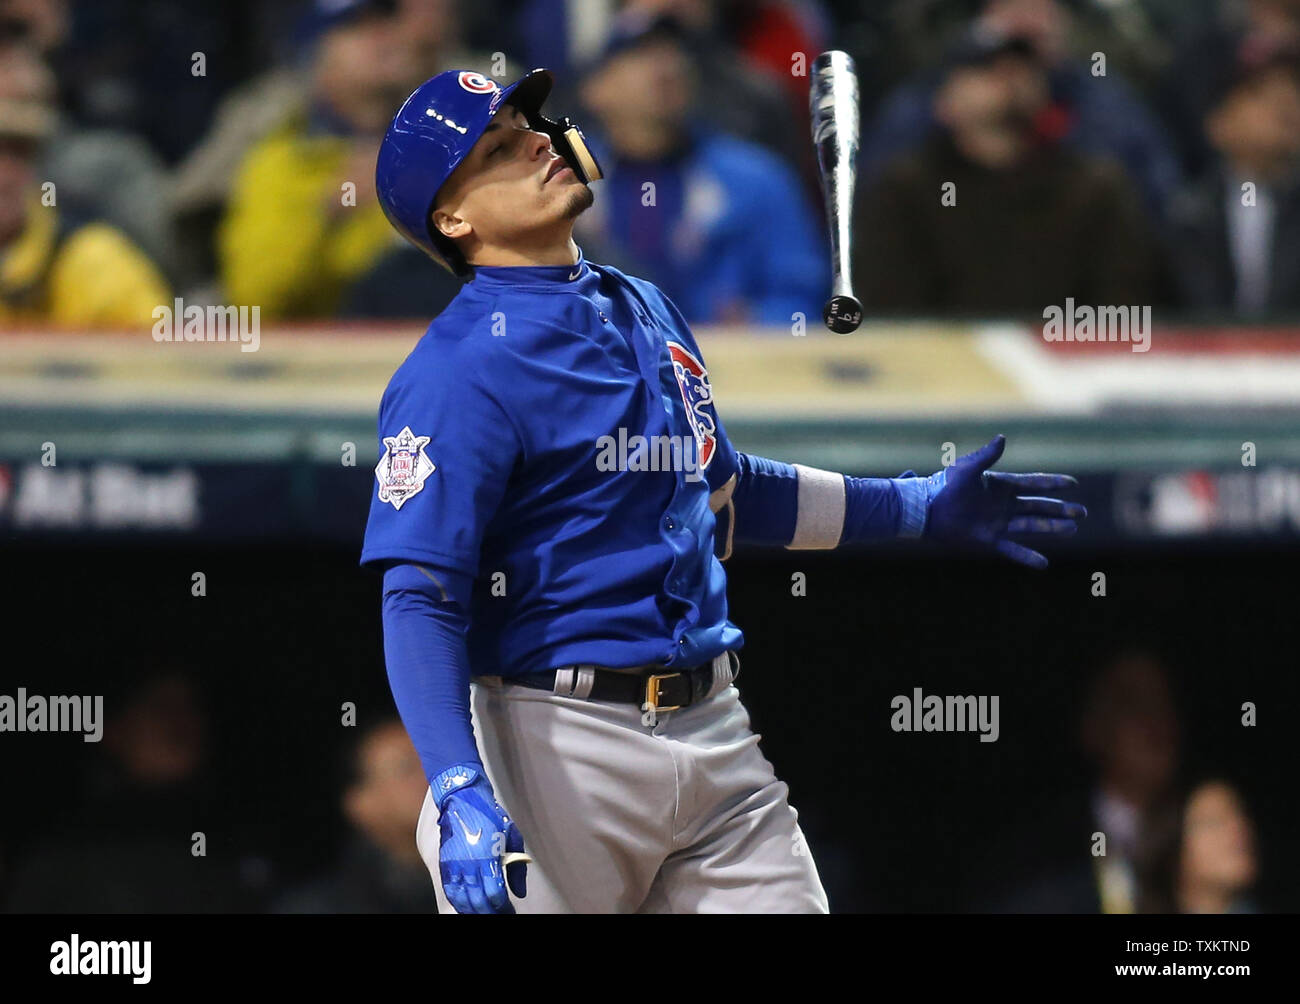 Chicago Cubs' Javier Baez flies out against the Cleveland Indians to end  the sixth inning of game 2 of the World Series at Progressive Field in  Cleveland, Ohio on October 26, 2016.